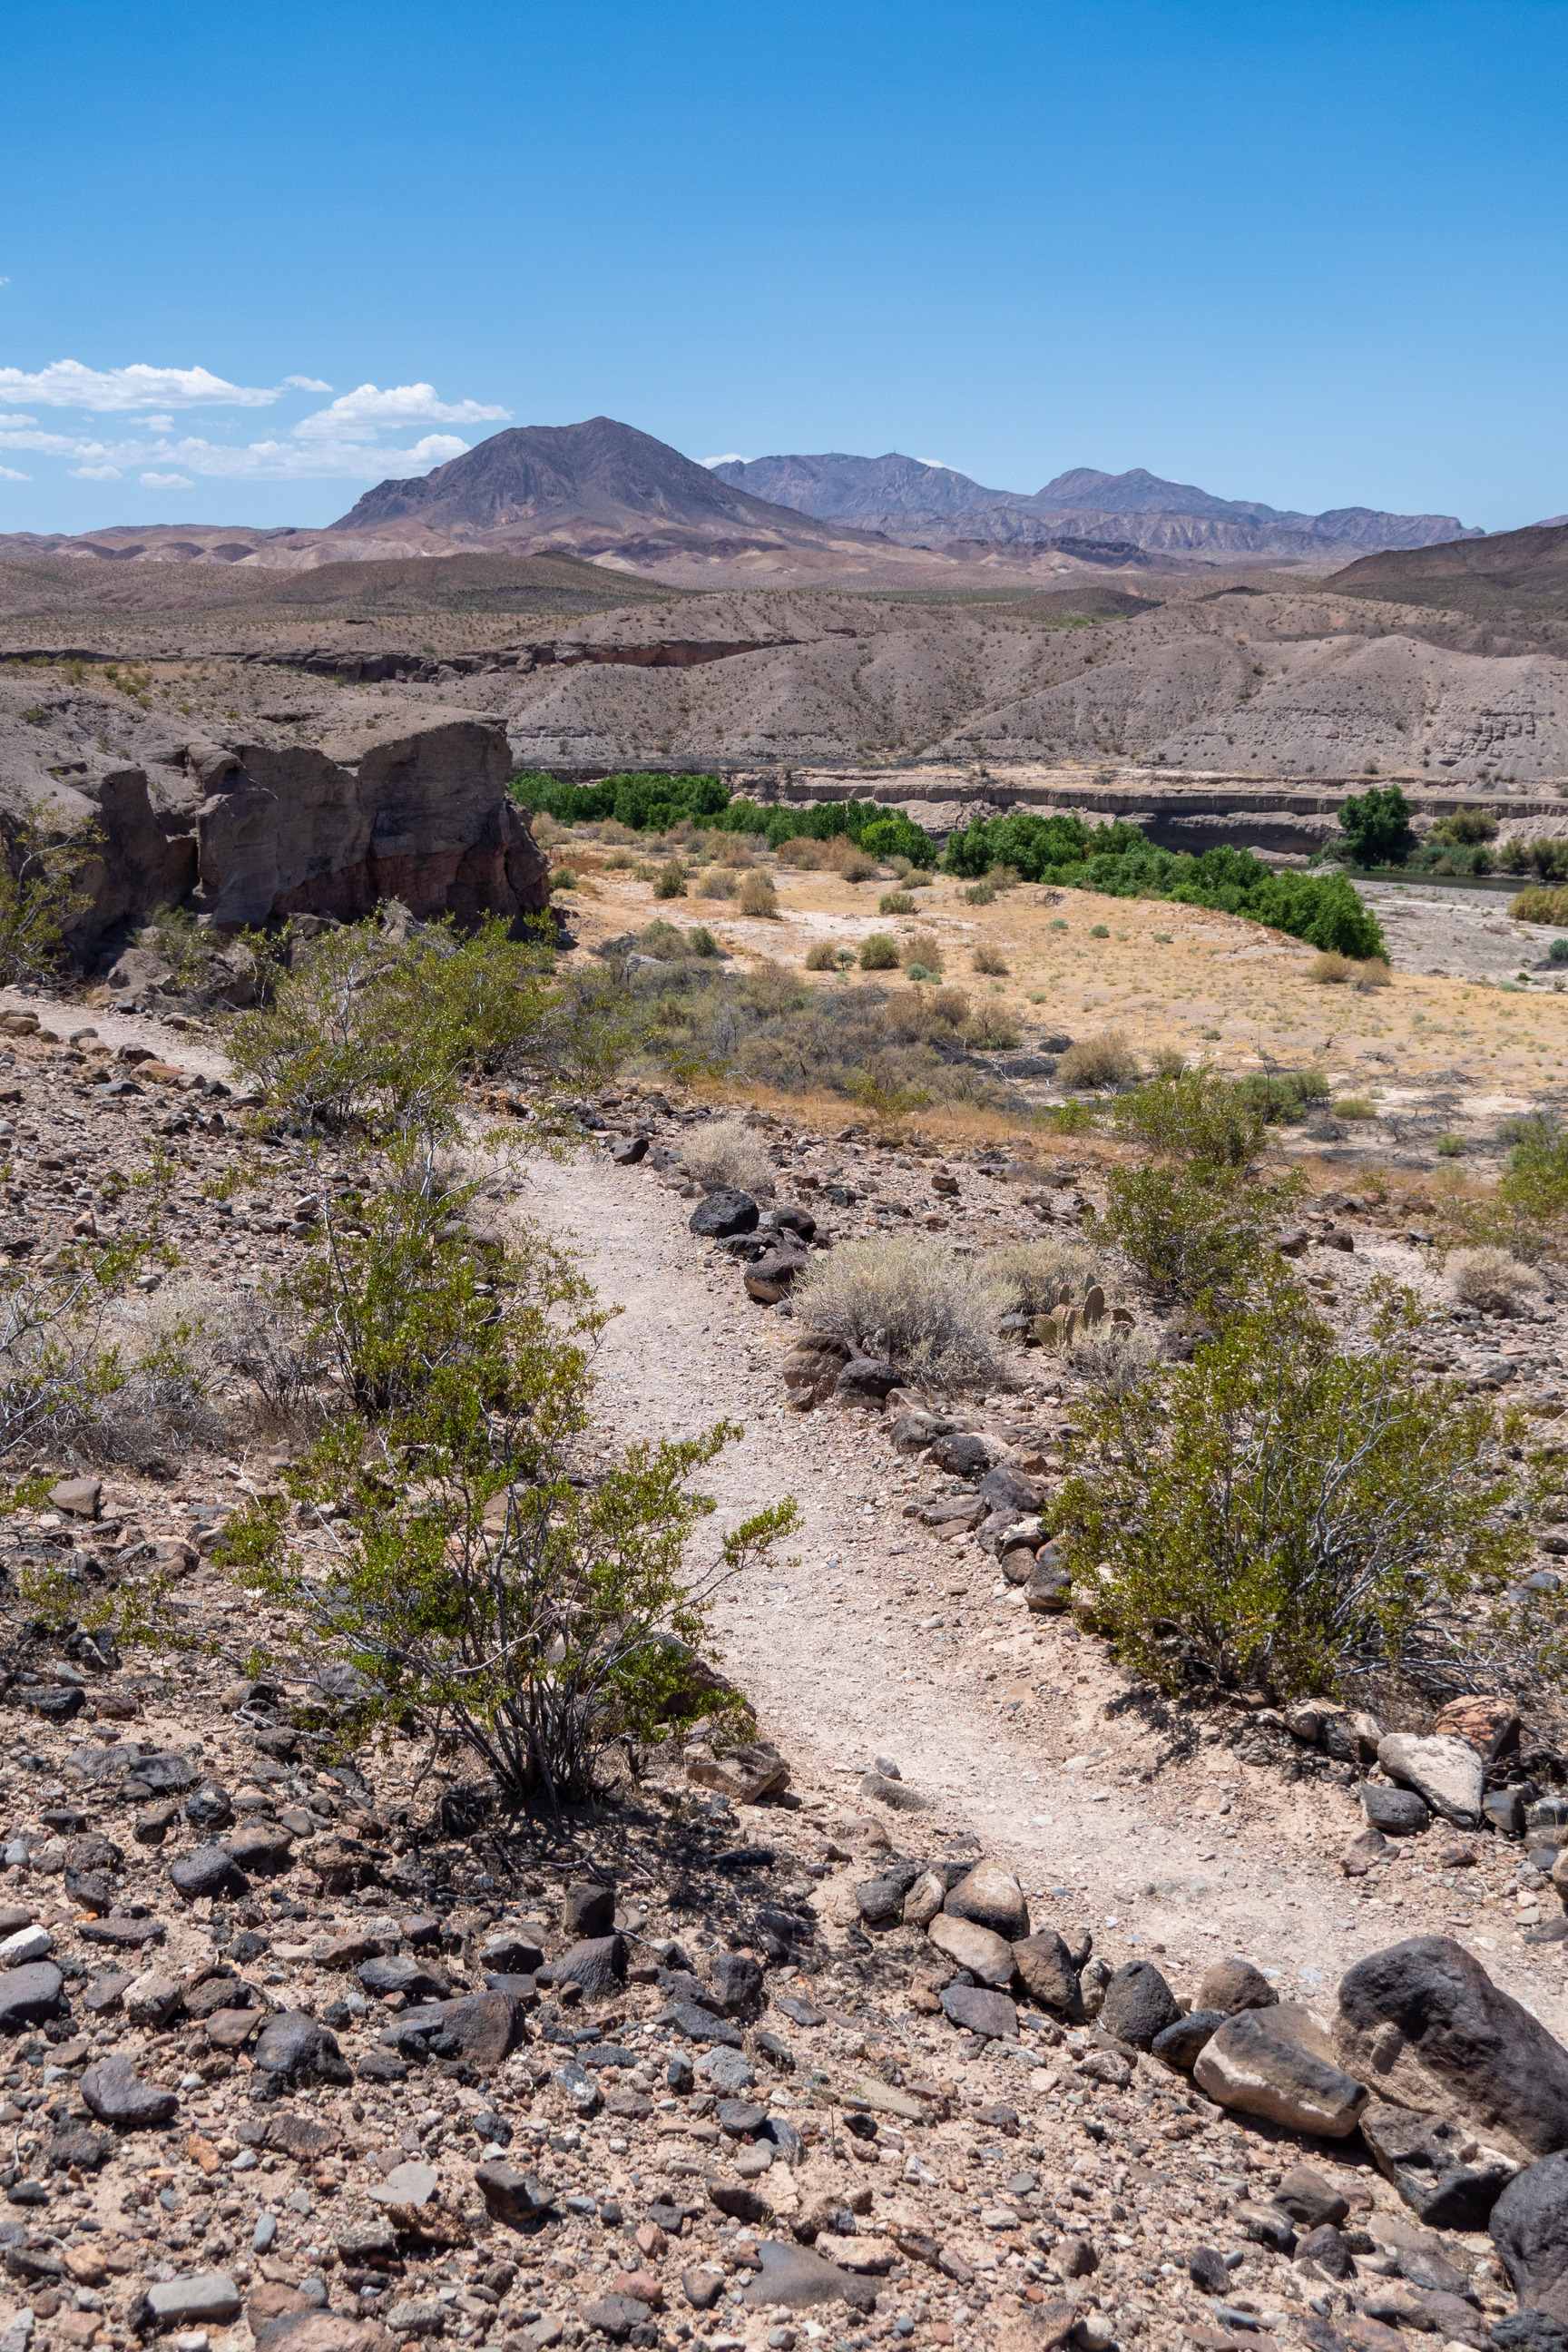 Rock lined trail leading into photo, trees in wash below, mountains in distance